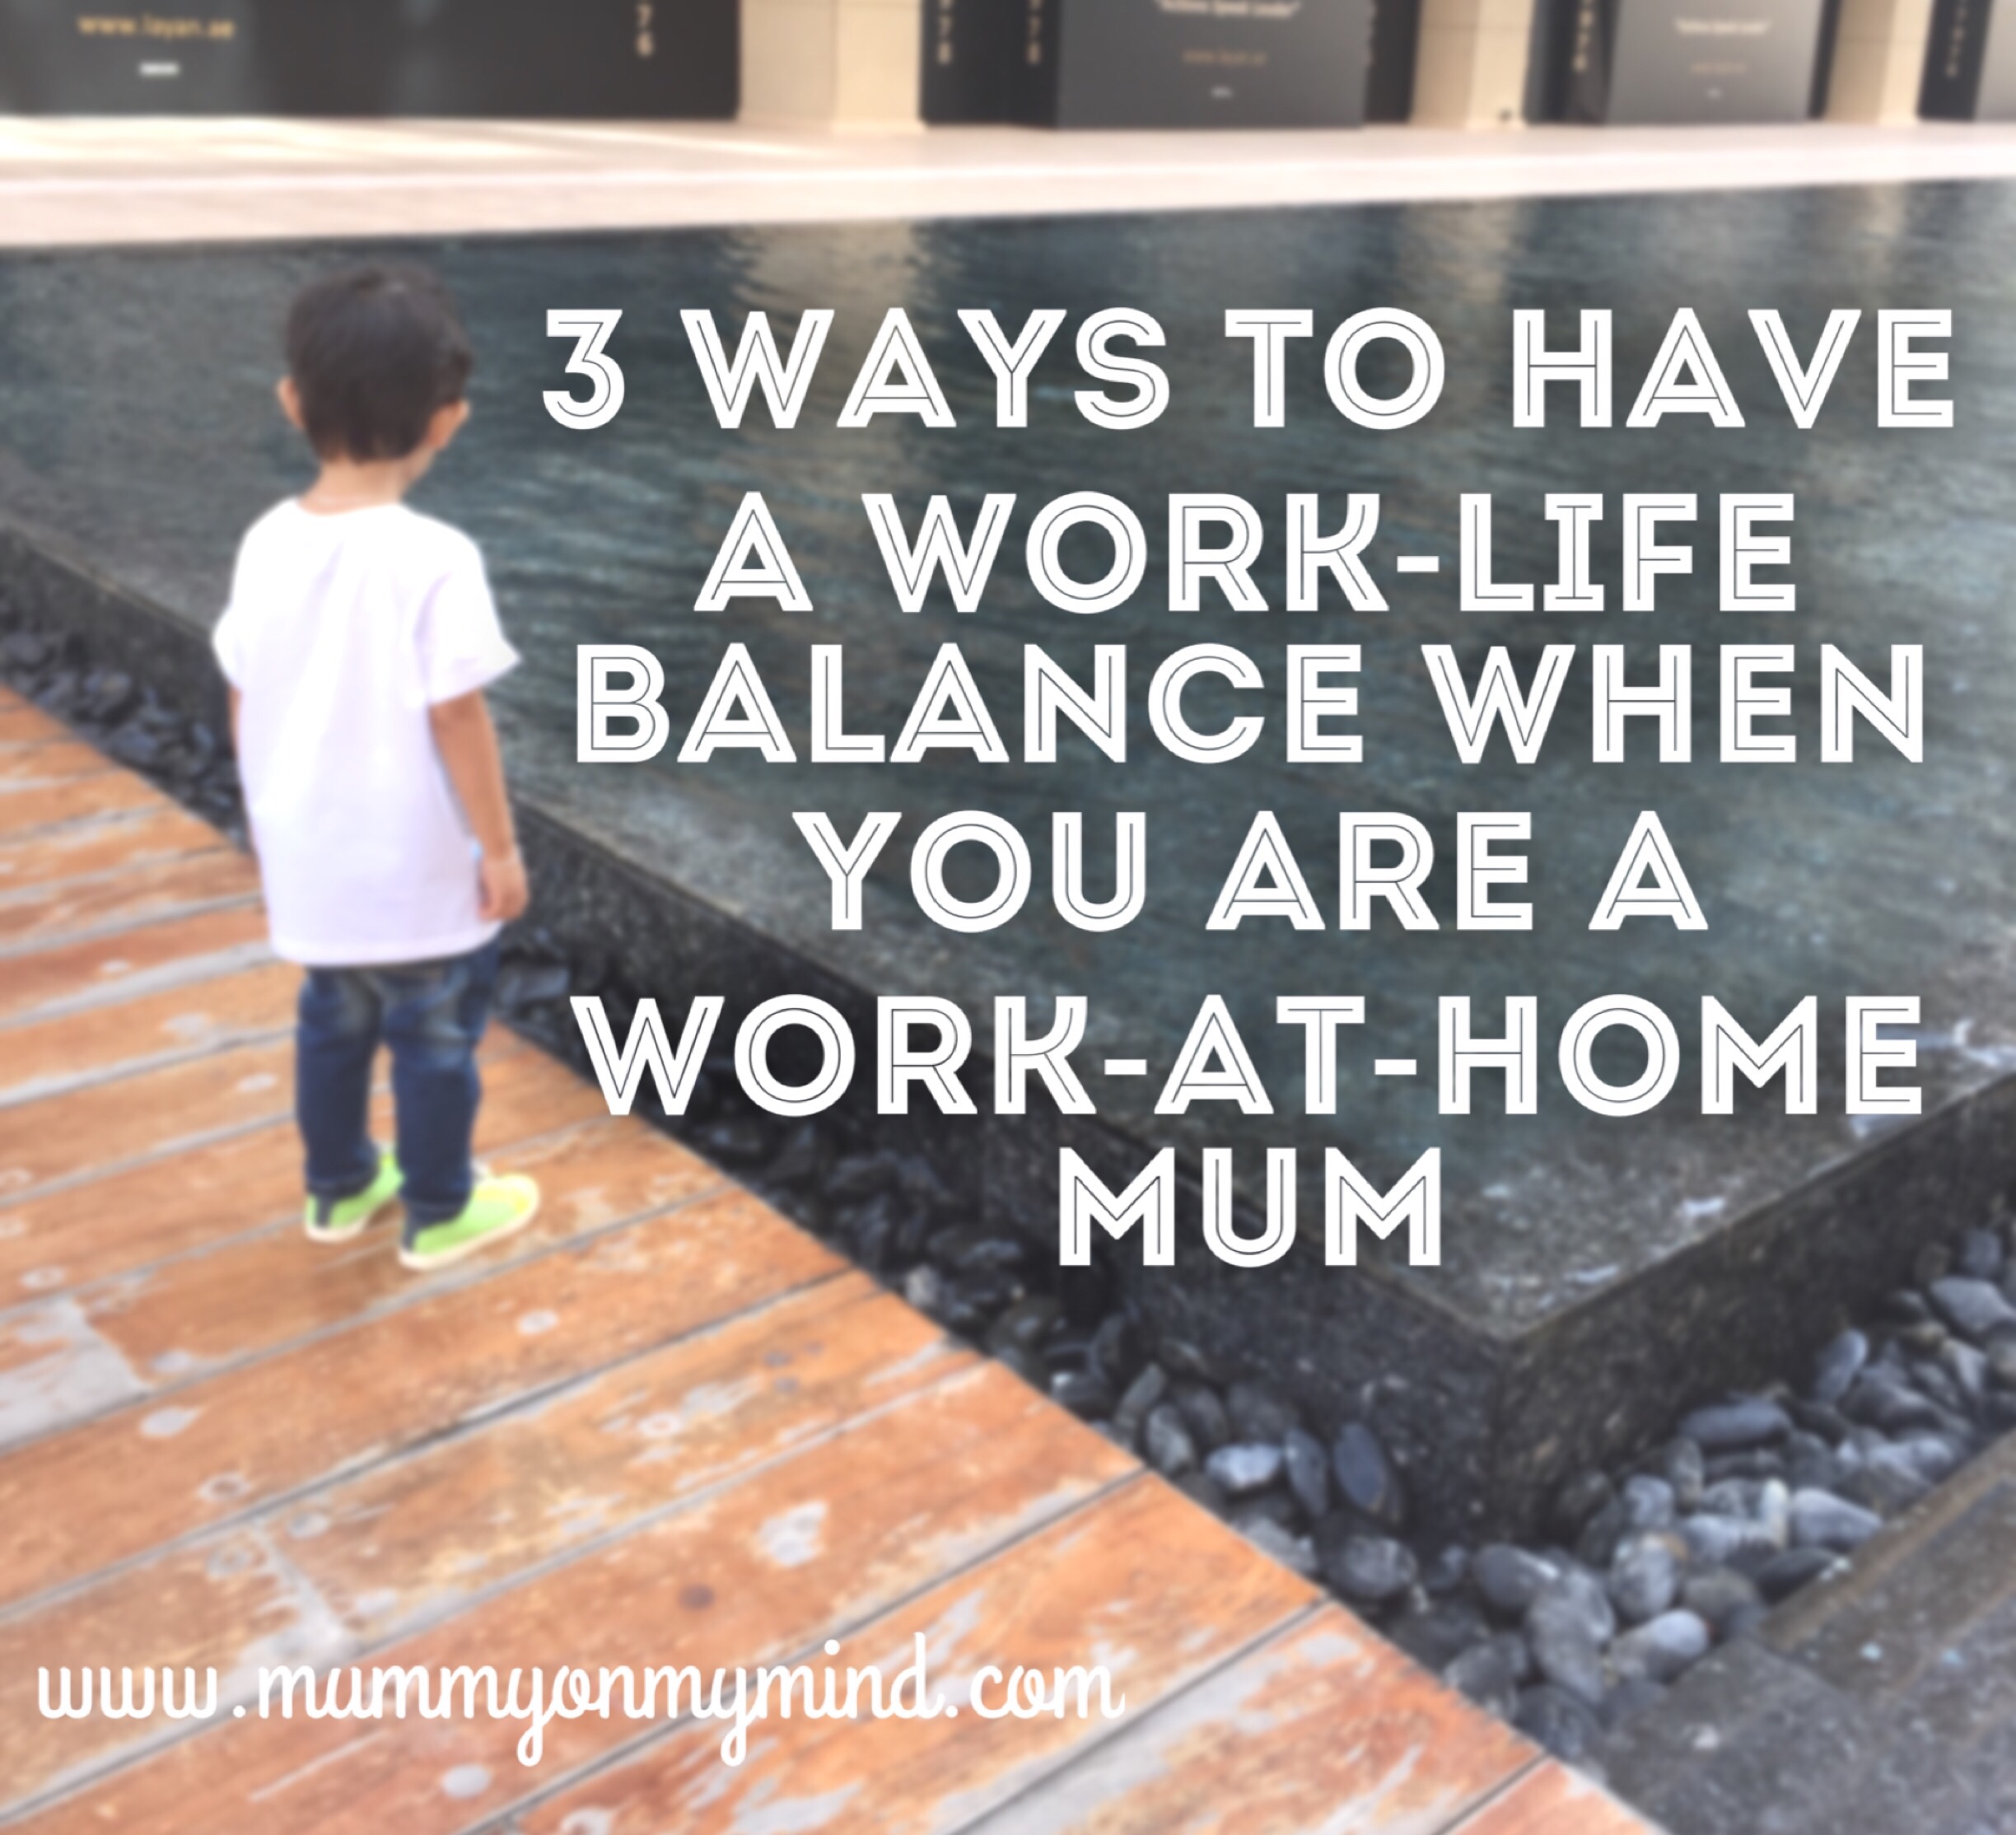 3 Ways To Have a Work-Life Balance when you are a Work at Home Mum…